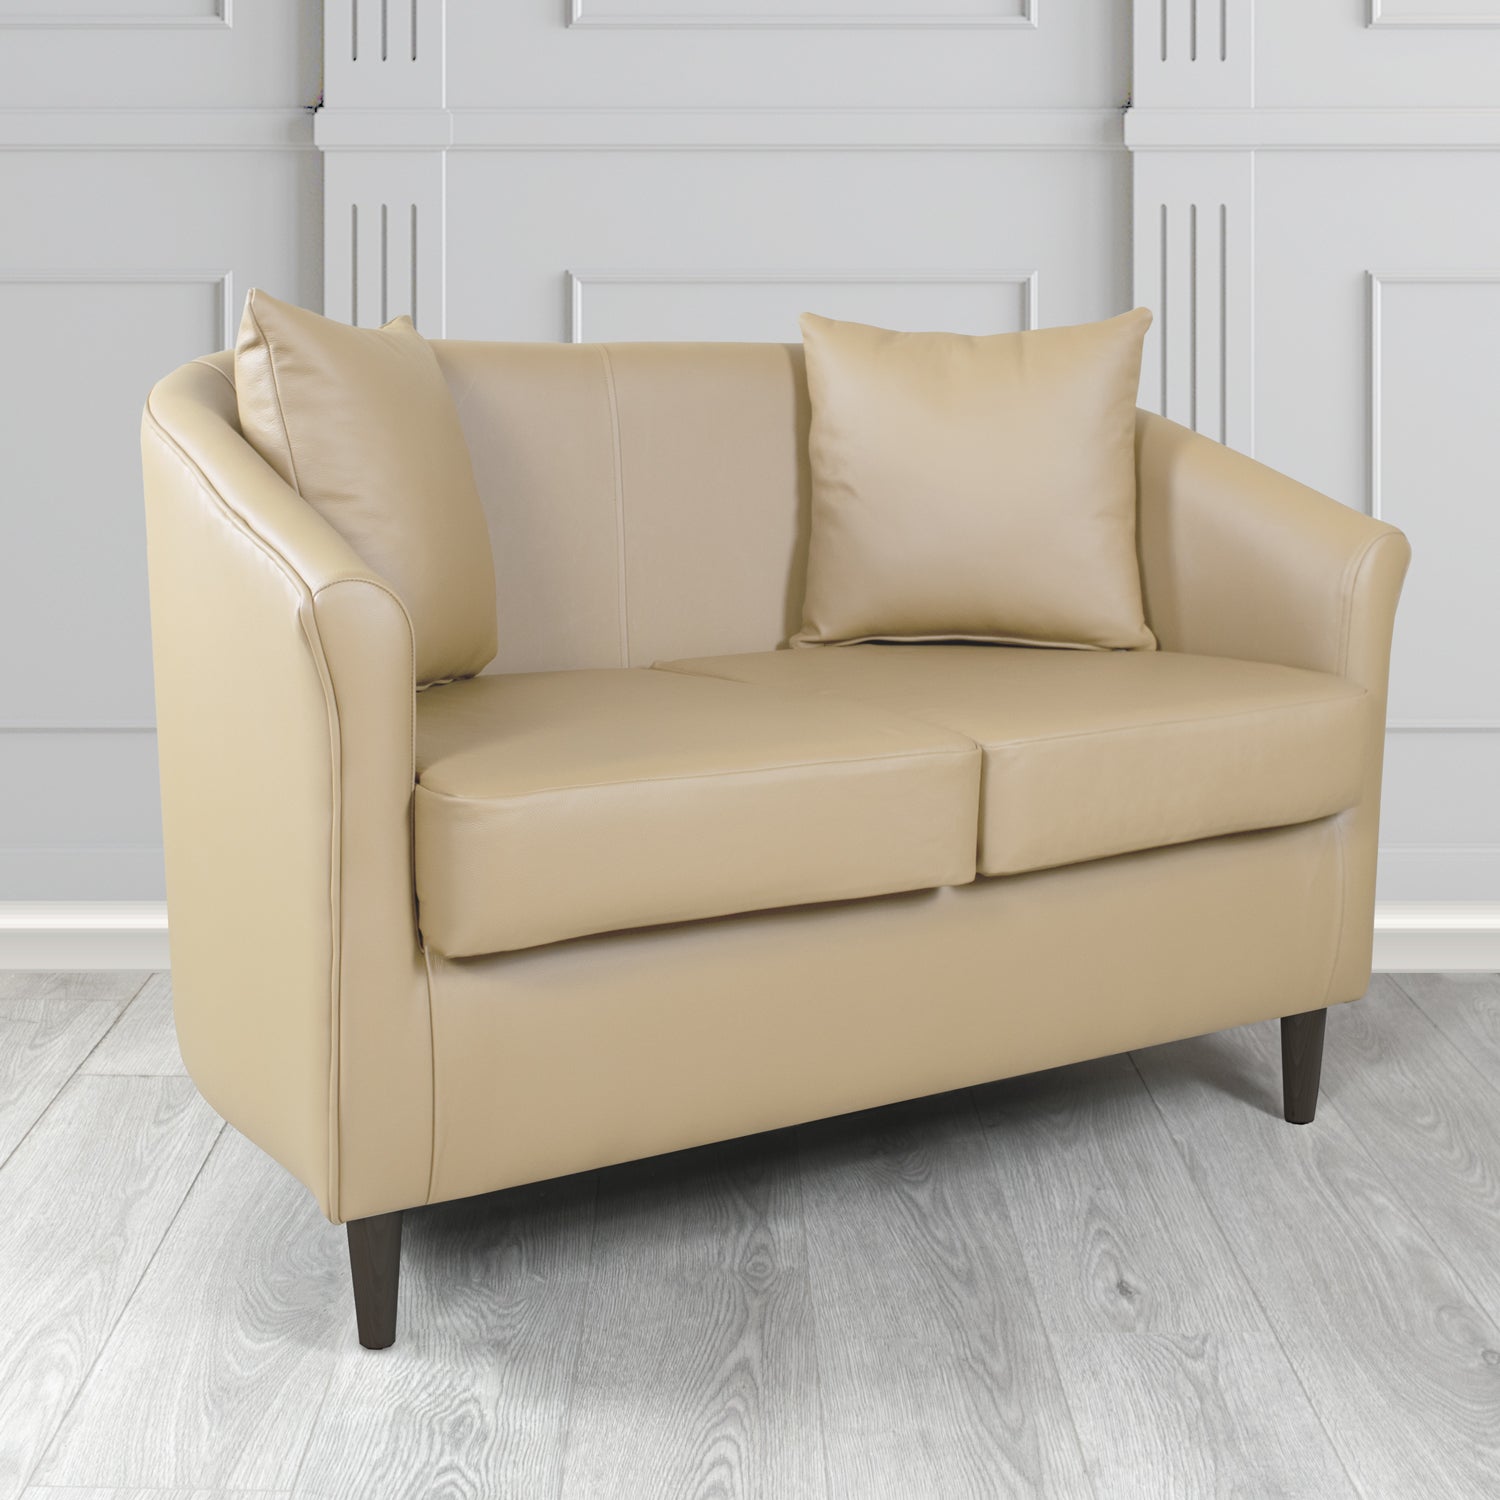 St Tropez Shelly Basket Crib 5 Genuine Leather 2 Seater Tub Sofa with Scatter Cushions - The Tub Chair Shop